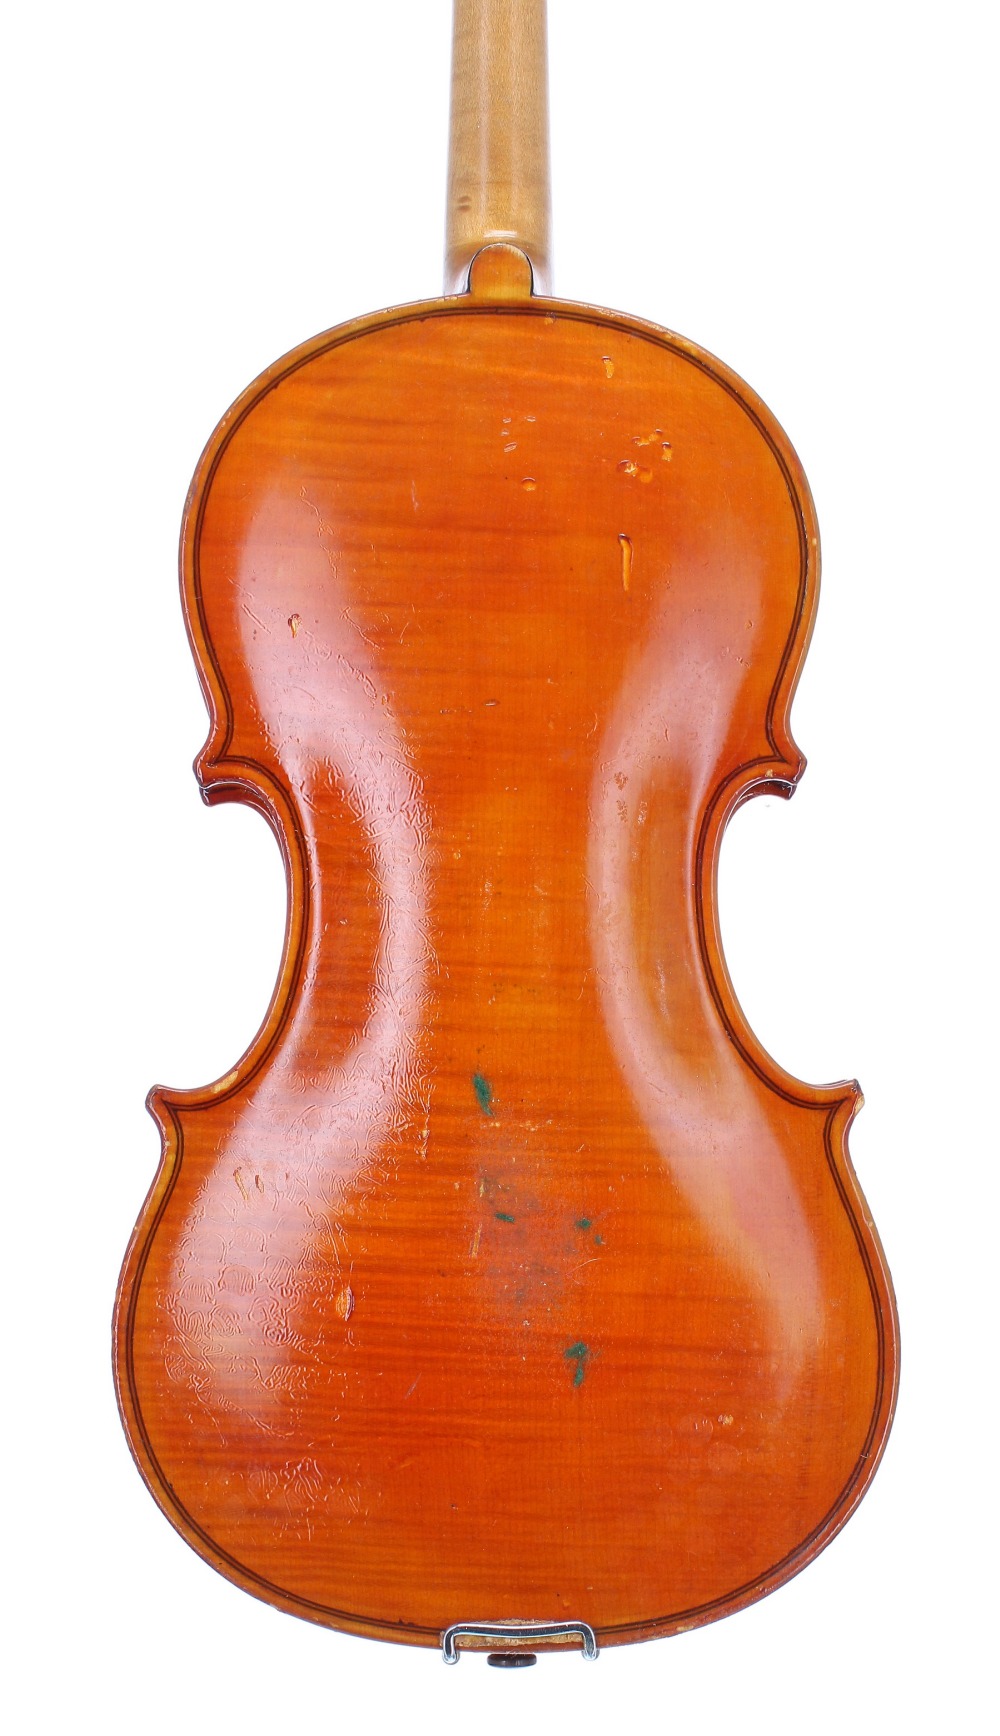 Scottish violin by and labelled John McCarter of Dalkeith, Scotland 1954, 14 1/8", 35.90cm, case - Image 2 of 3